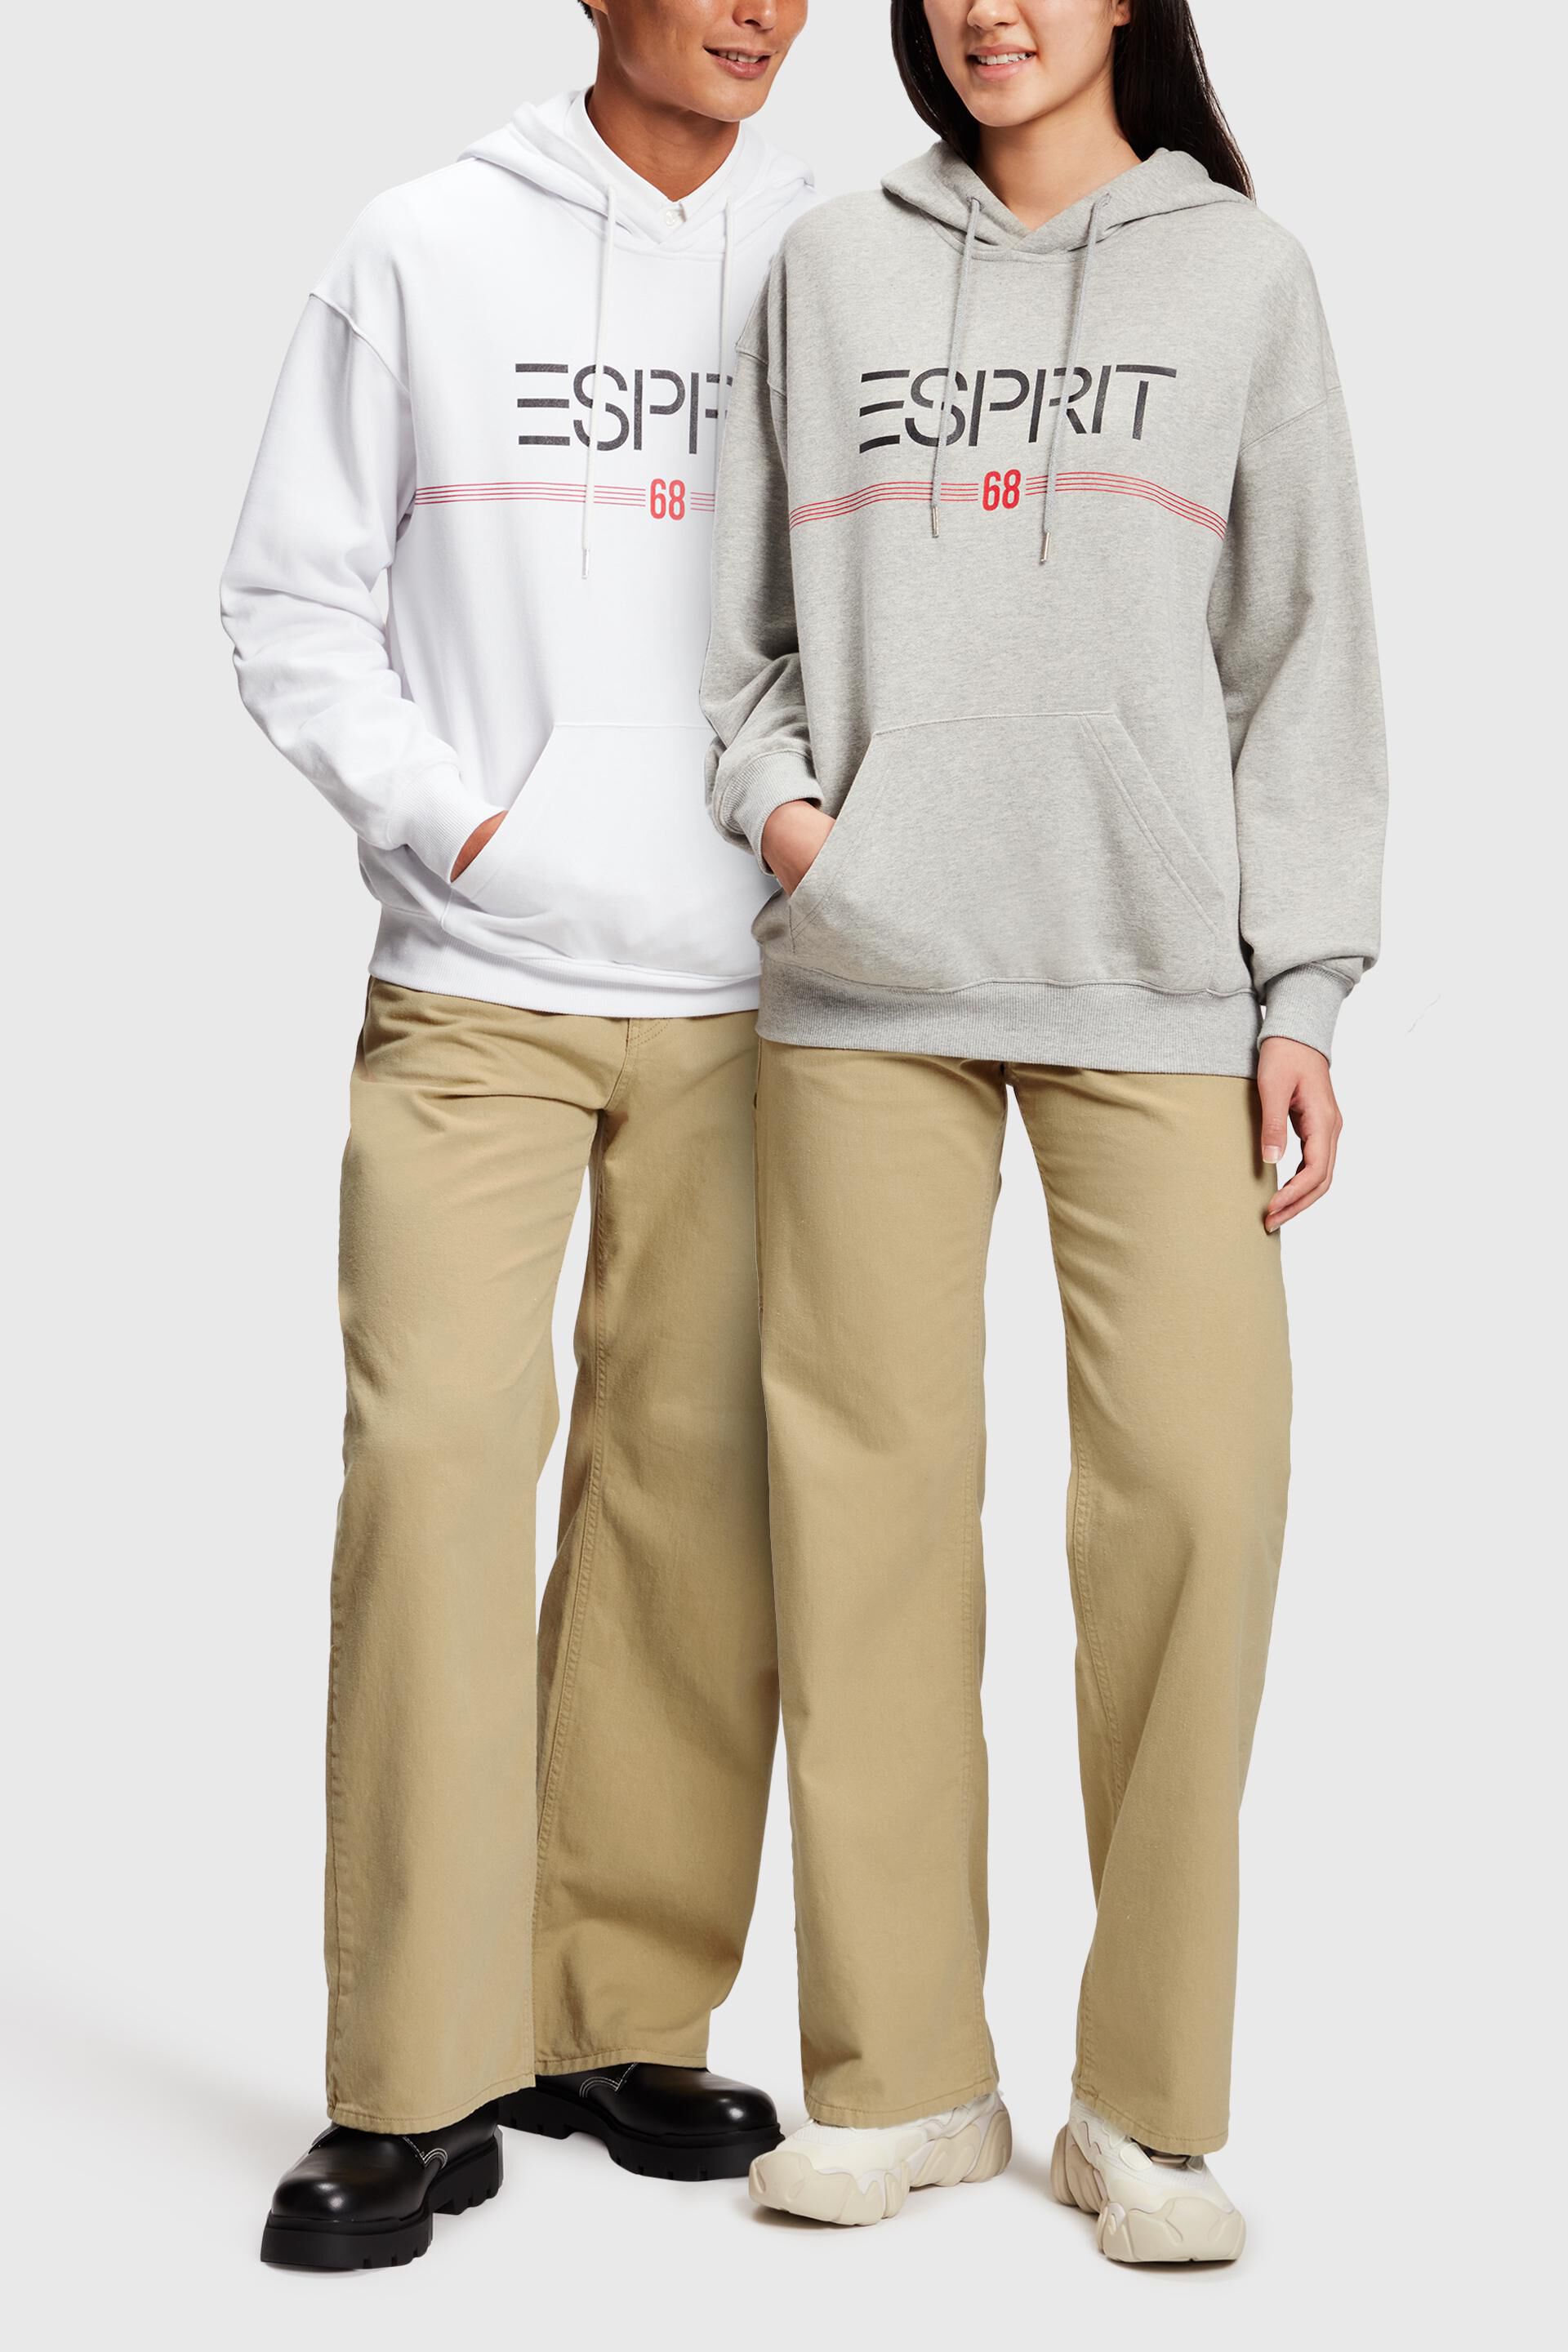 ESPRIT SALE Our reduced offers